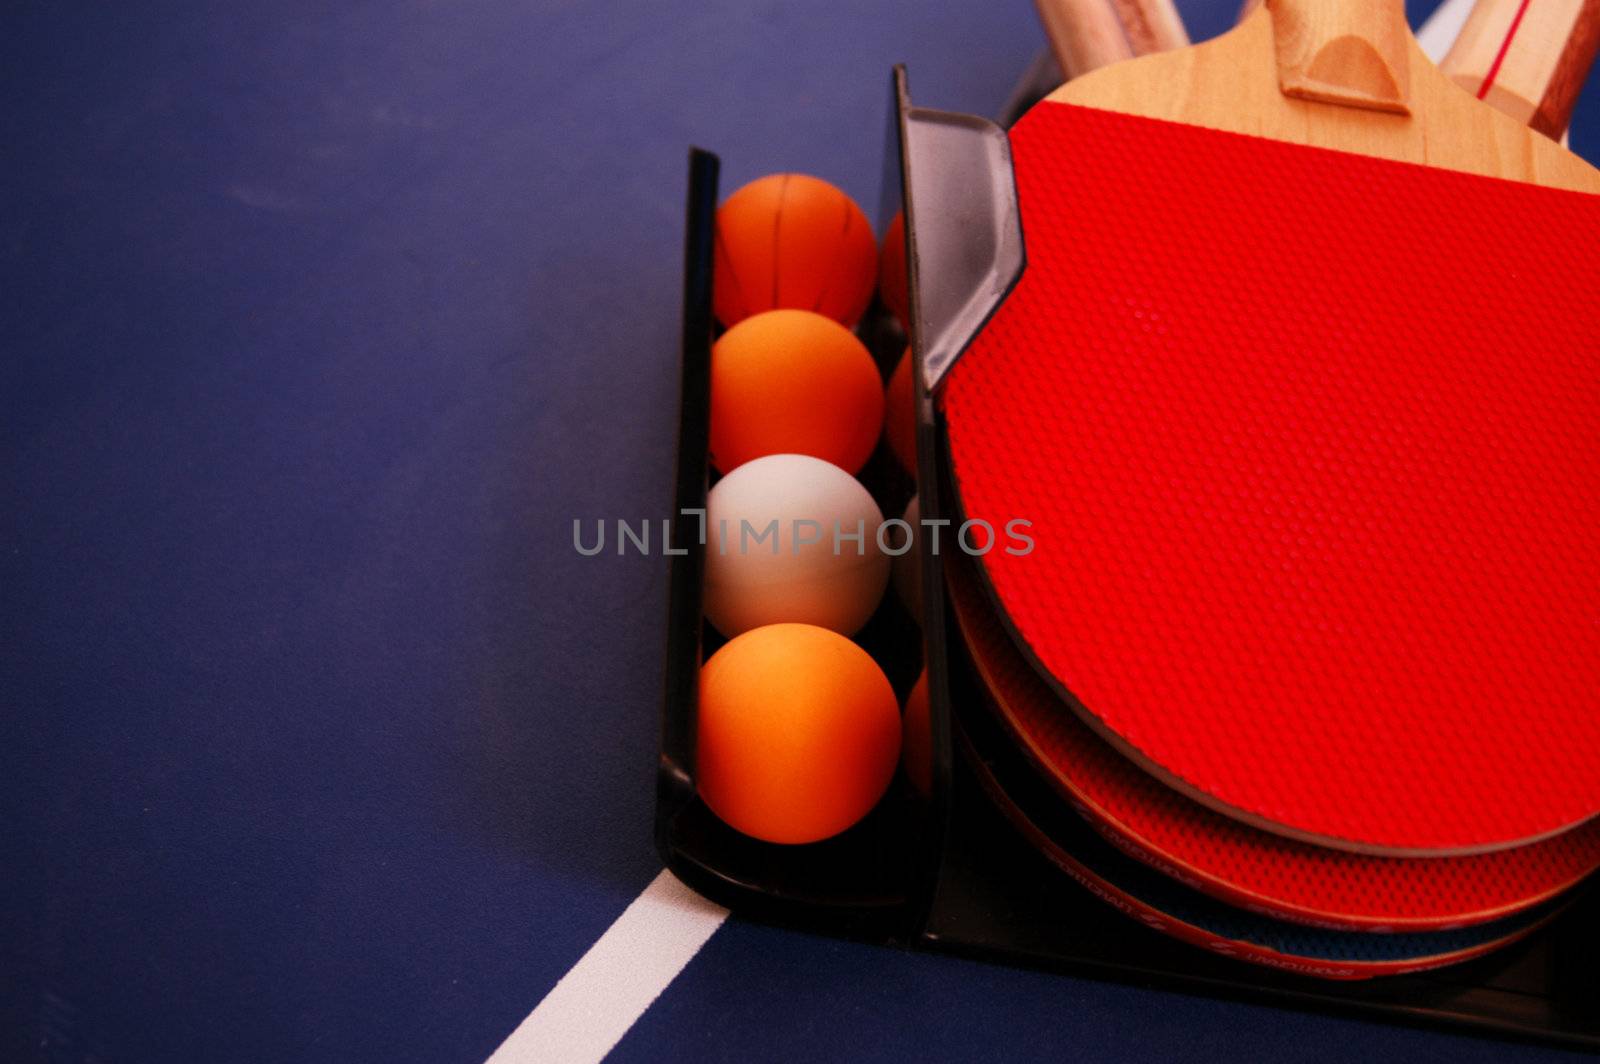 Ping pong set on a table